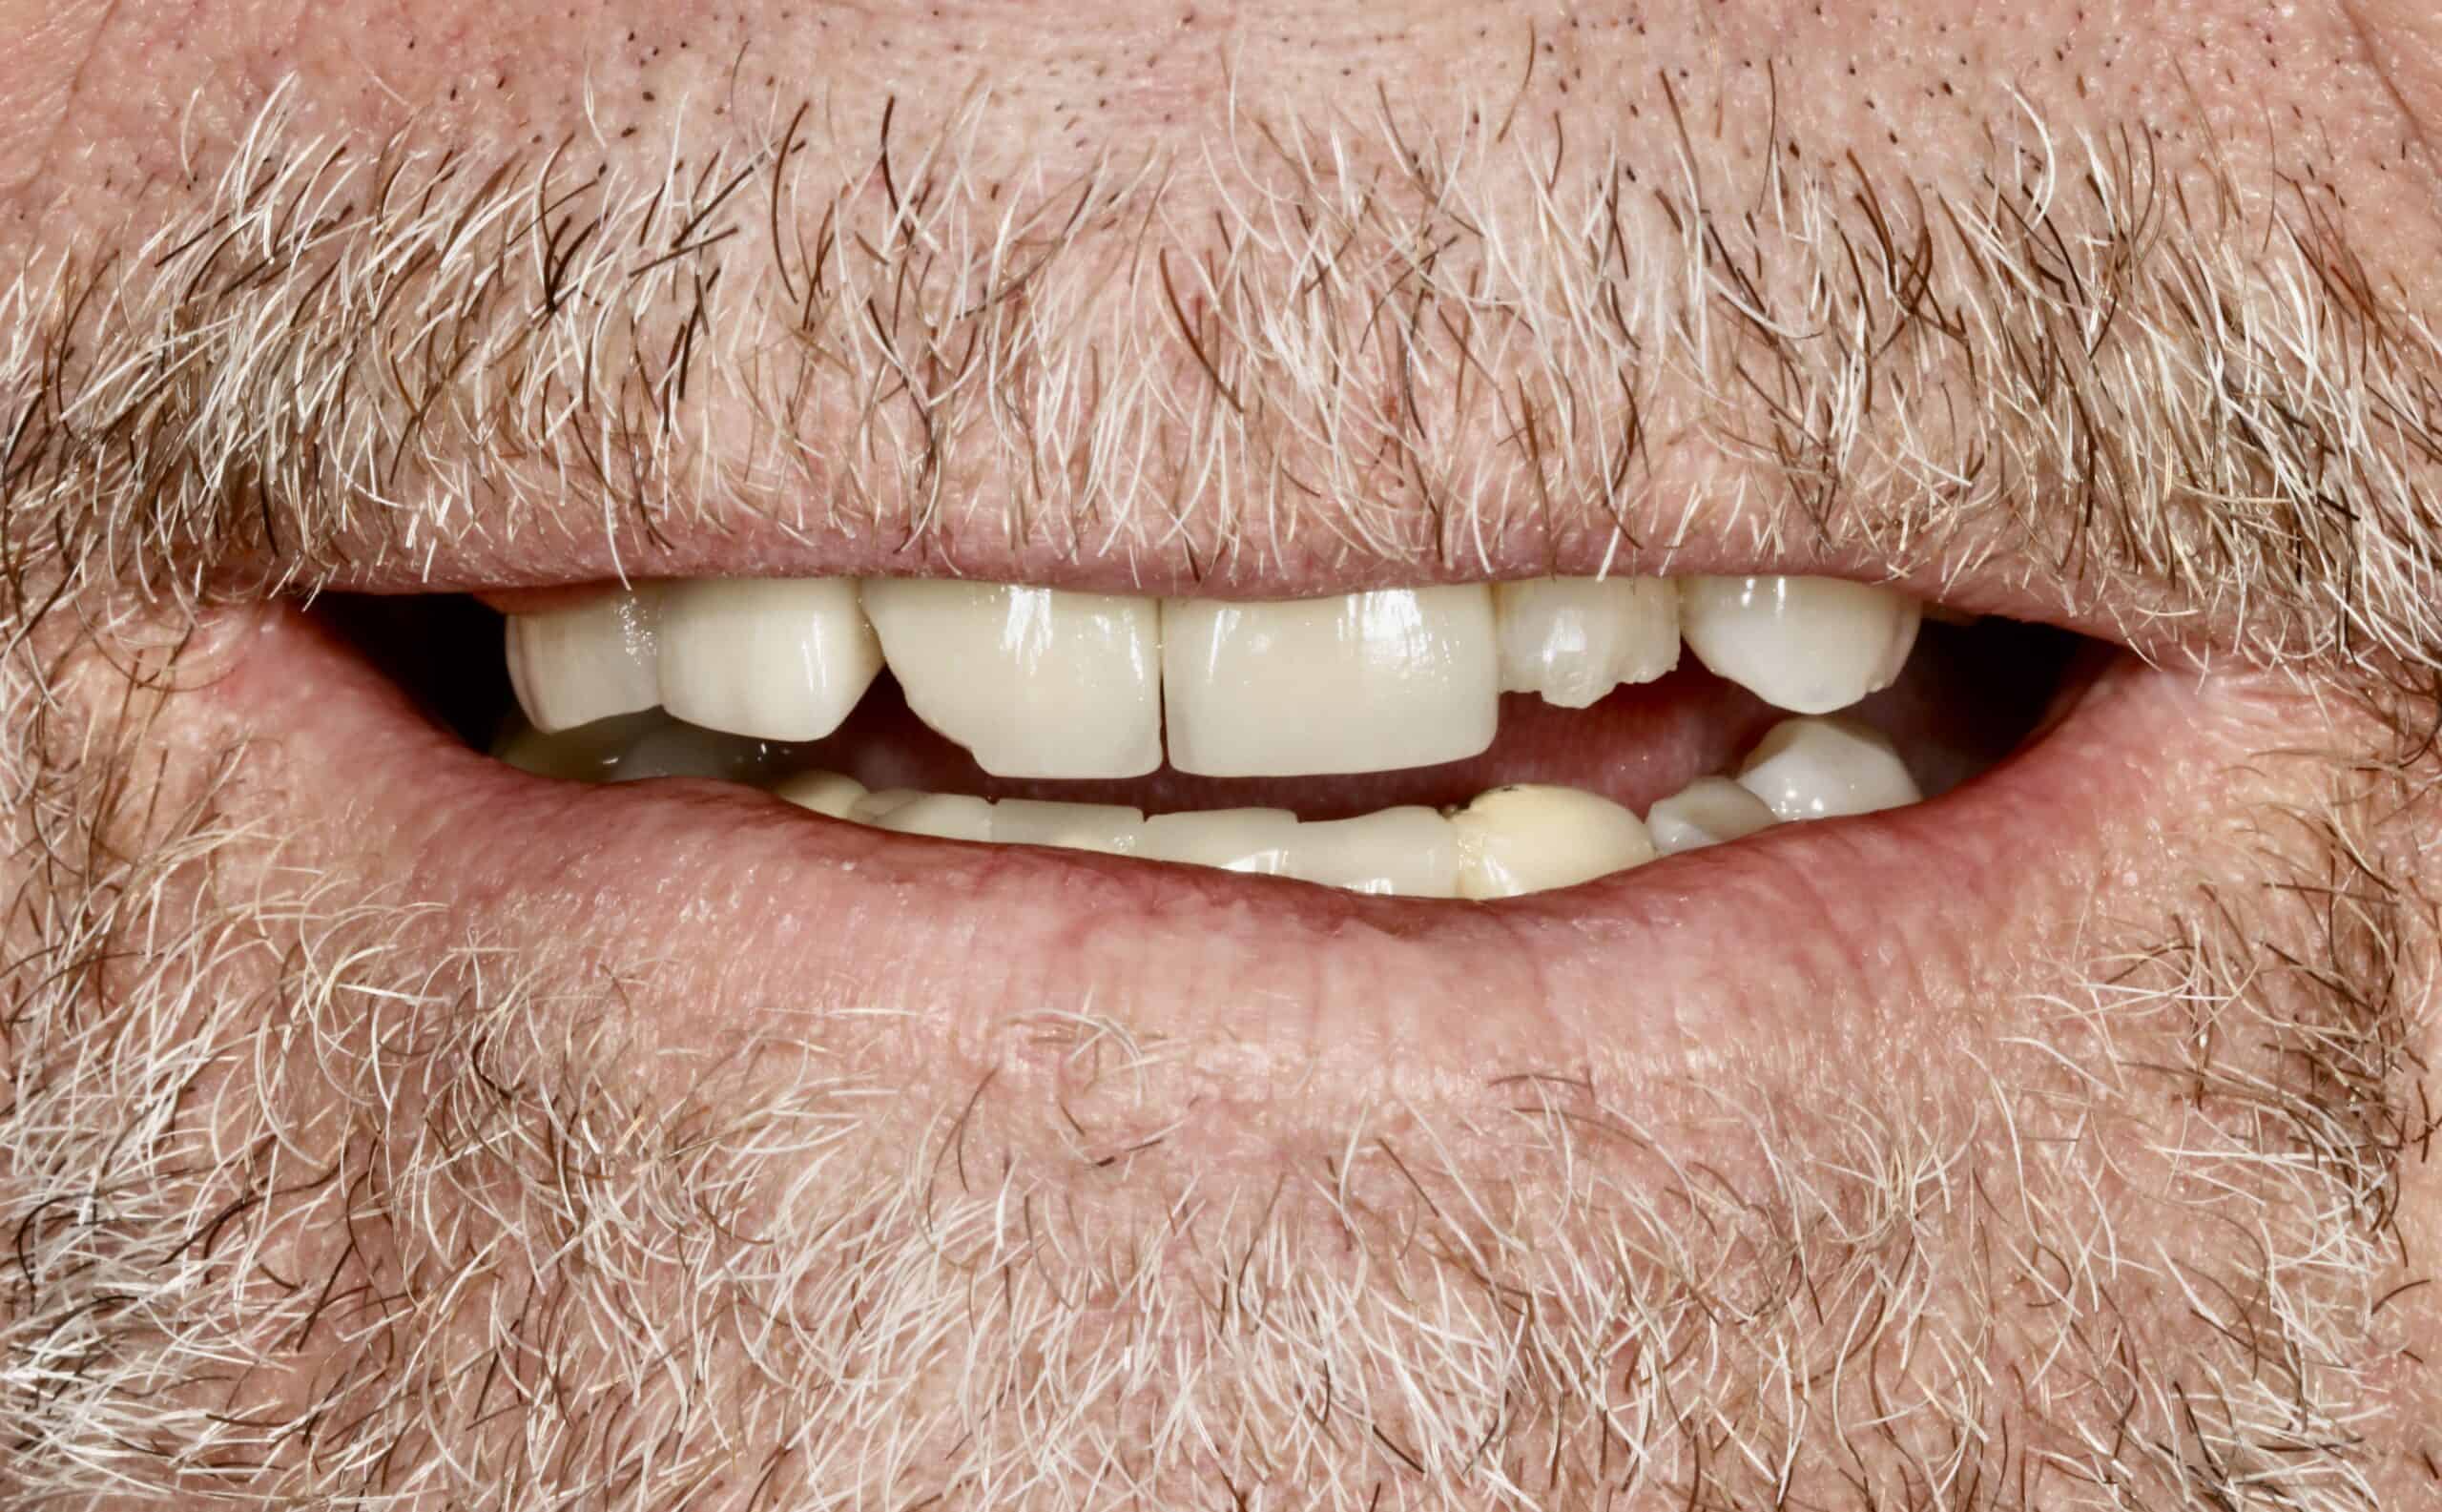 A close-up photo of a patient’s crooked, chipped teeth before receiving treatment at Signature Dentistry of Denver